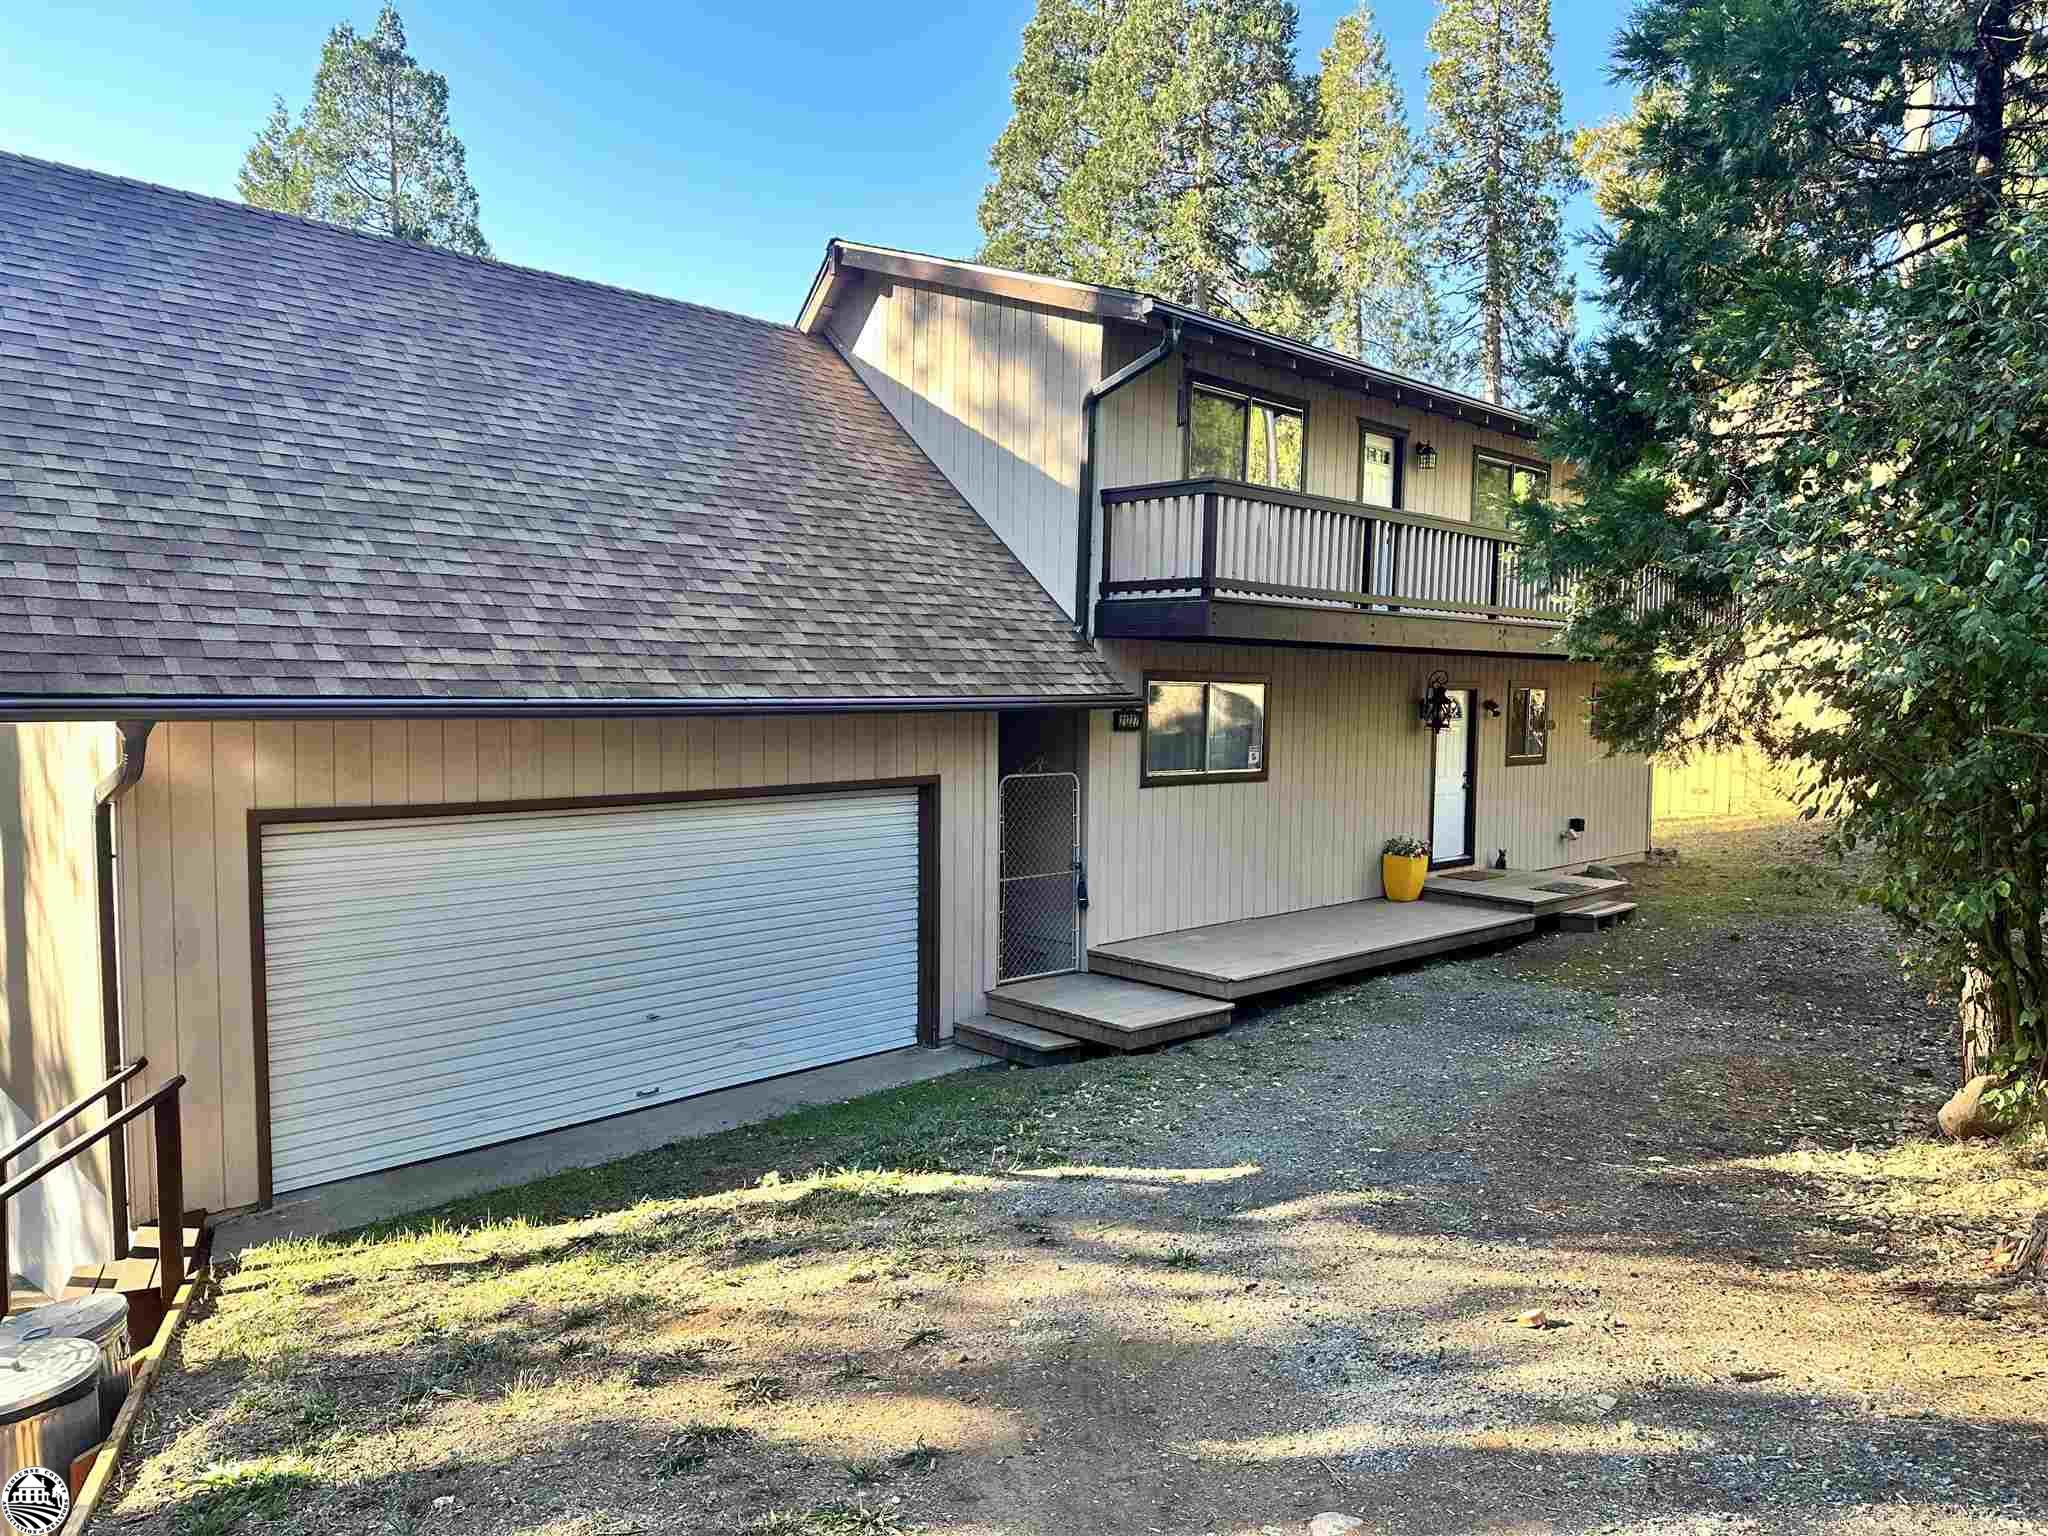 Photo of 21227 Placer Ave in Mi Wuk Village, CA